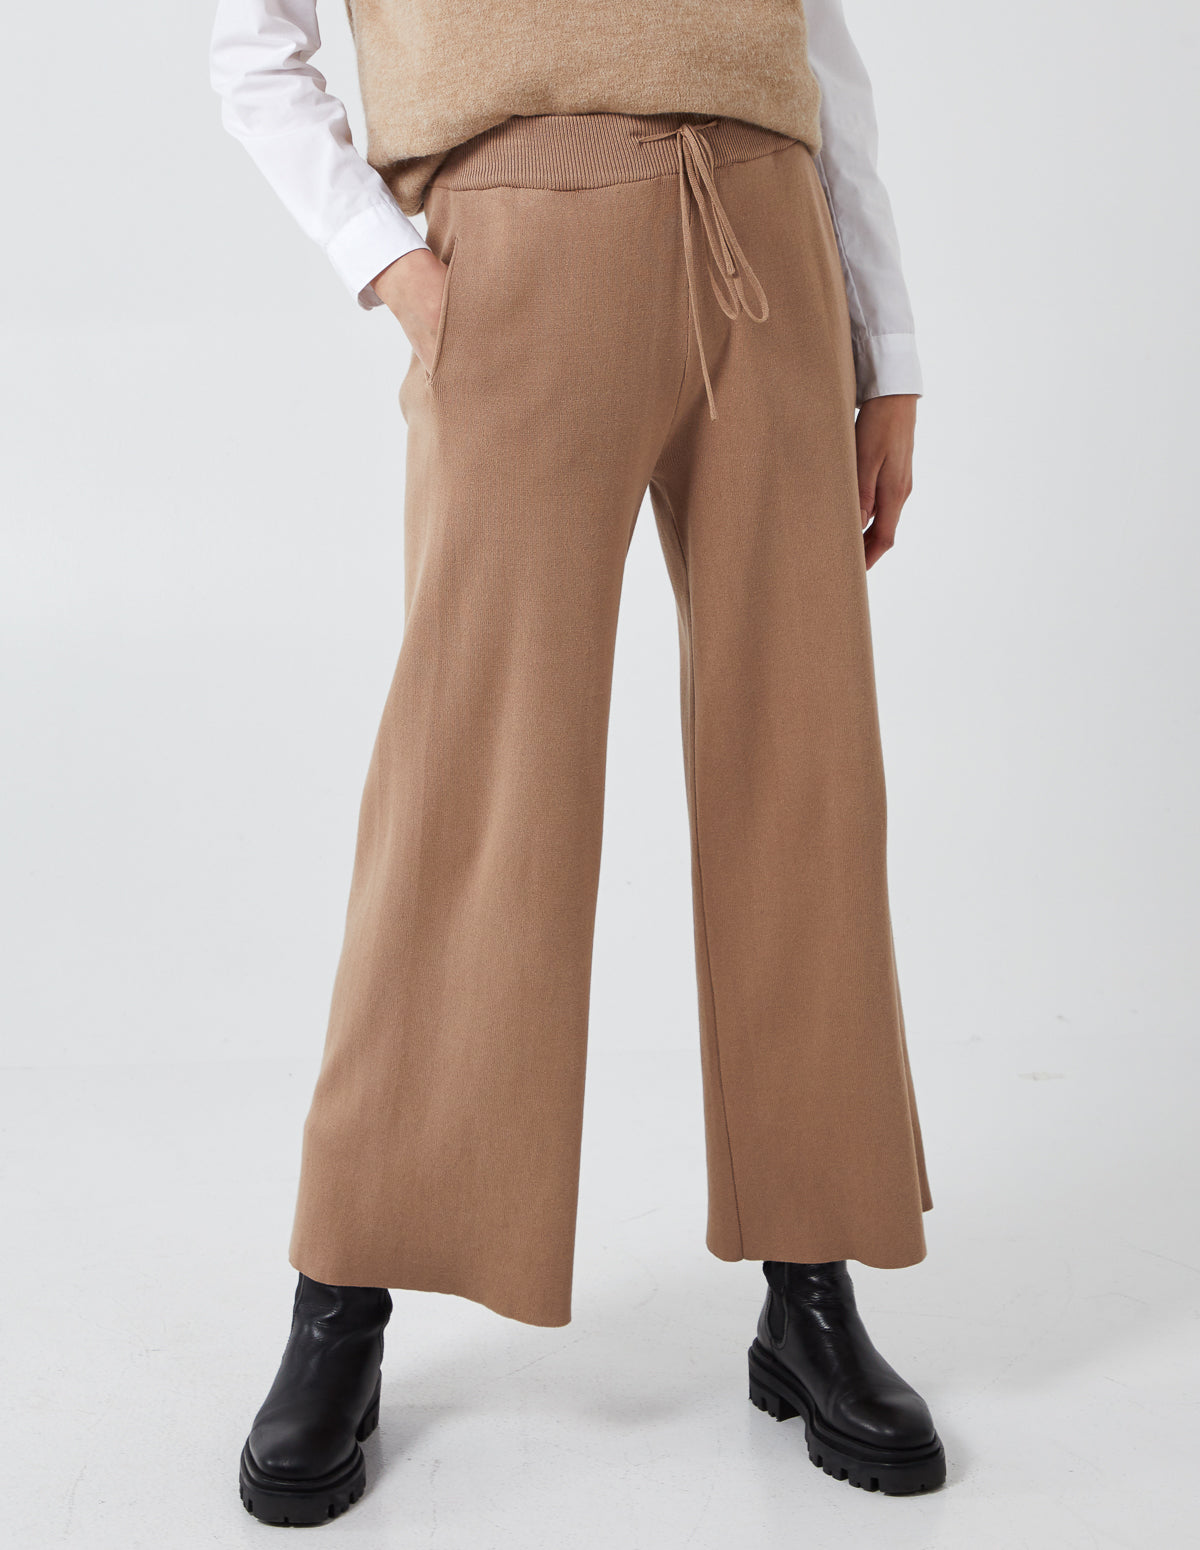 Knitted Drawstring Culottes - M/L / Camel